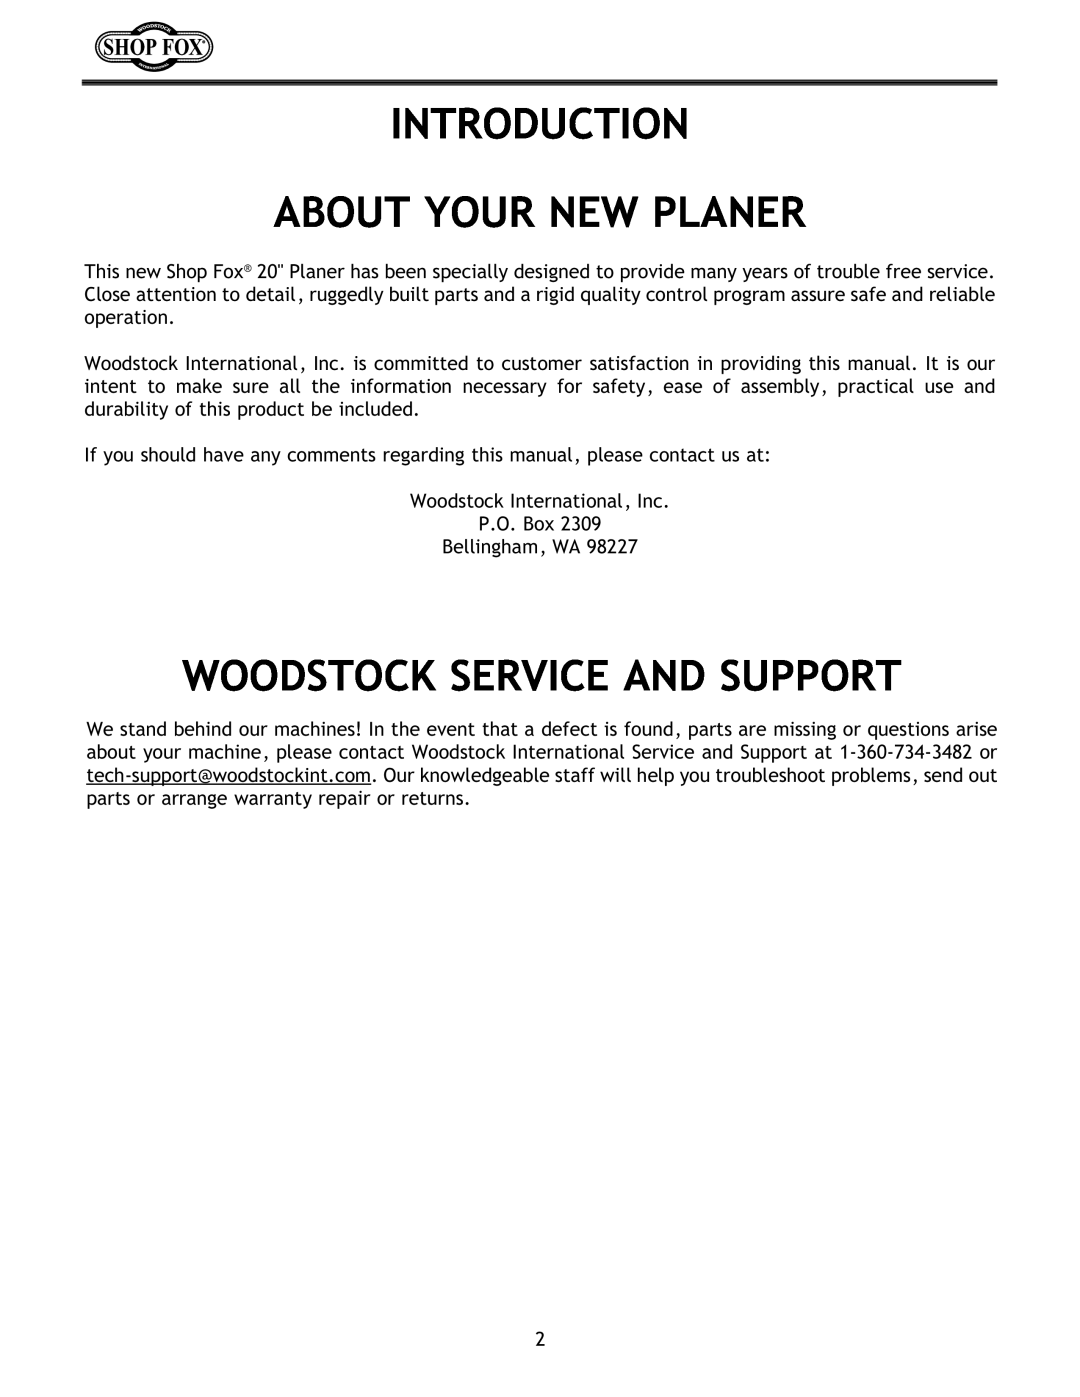 Woodstock W1683 instruction manual Introduction About Your New Planer, Woodstock Service And Support 